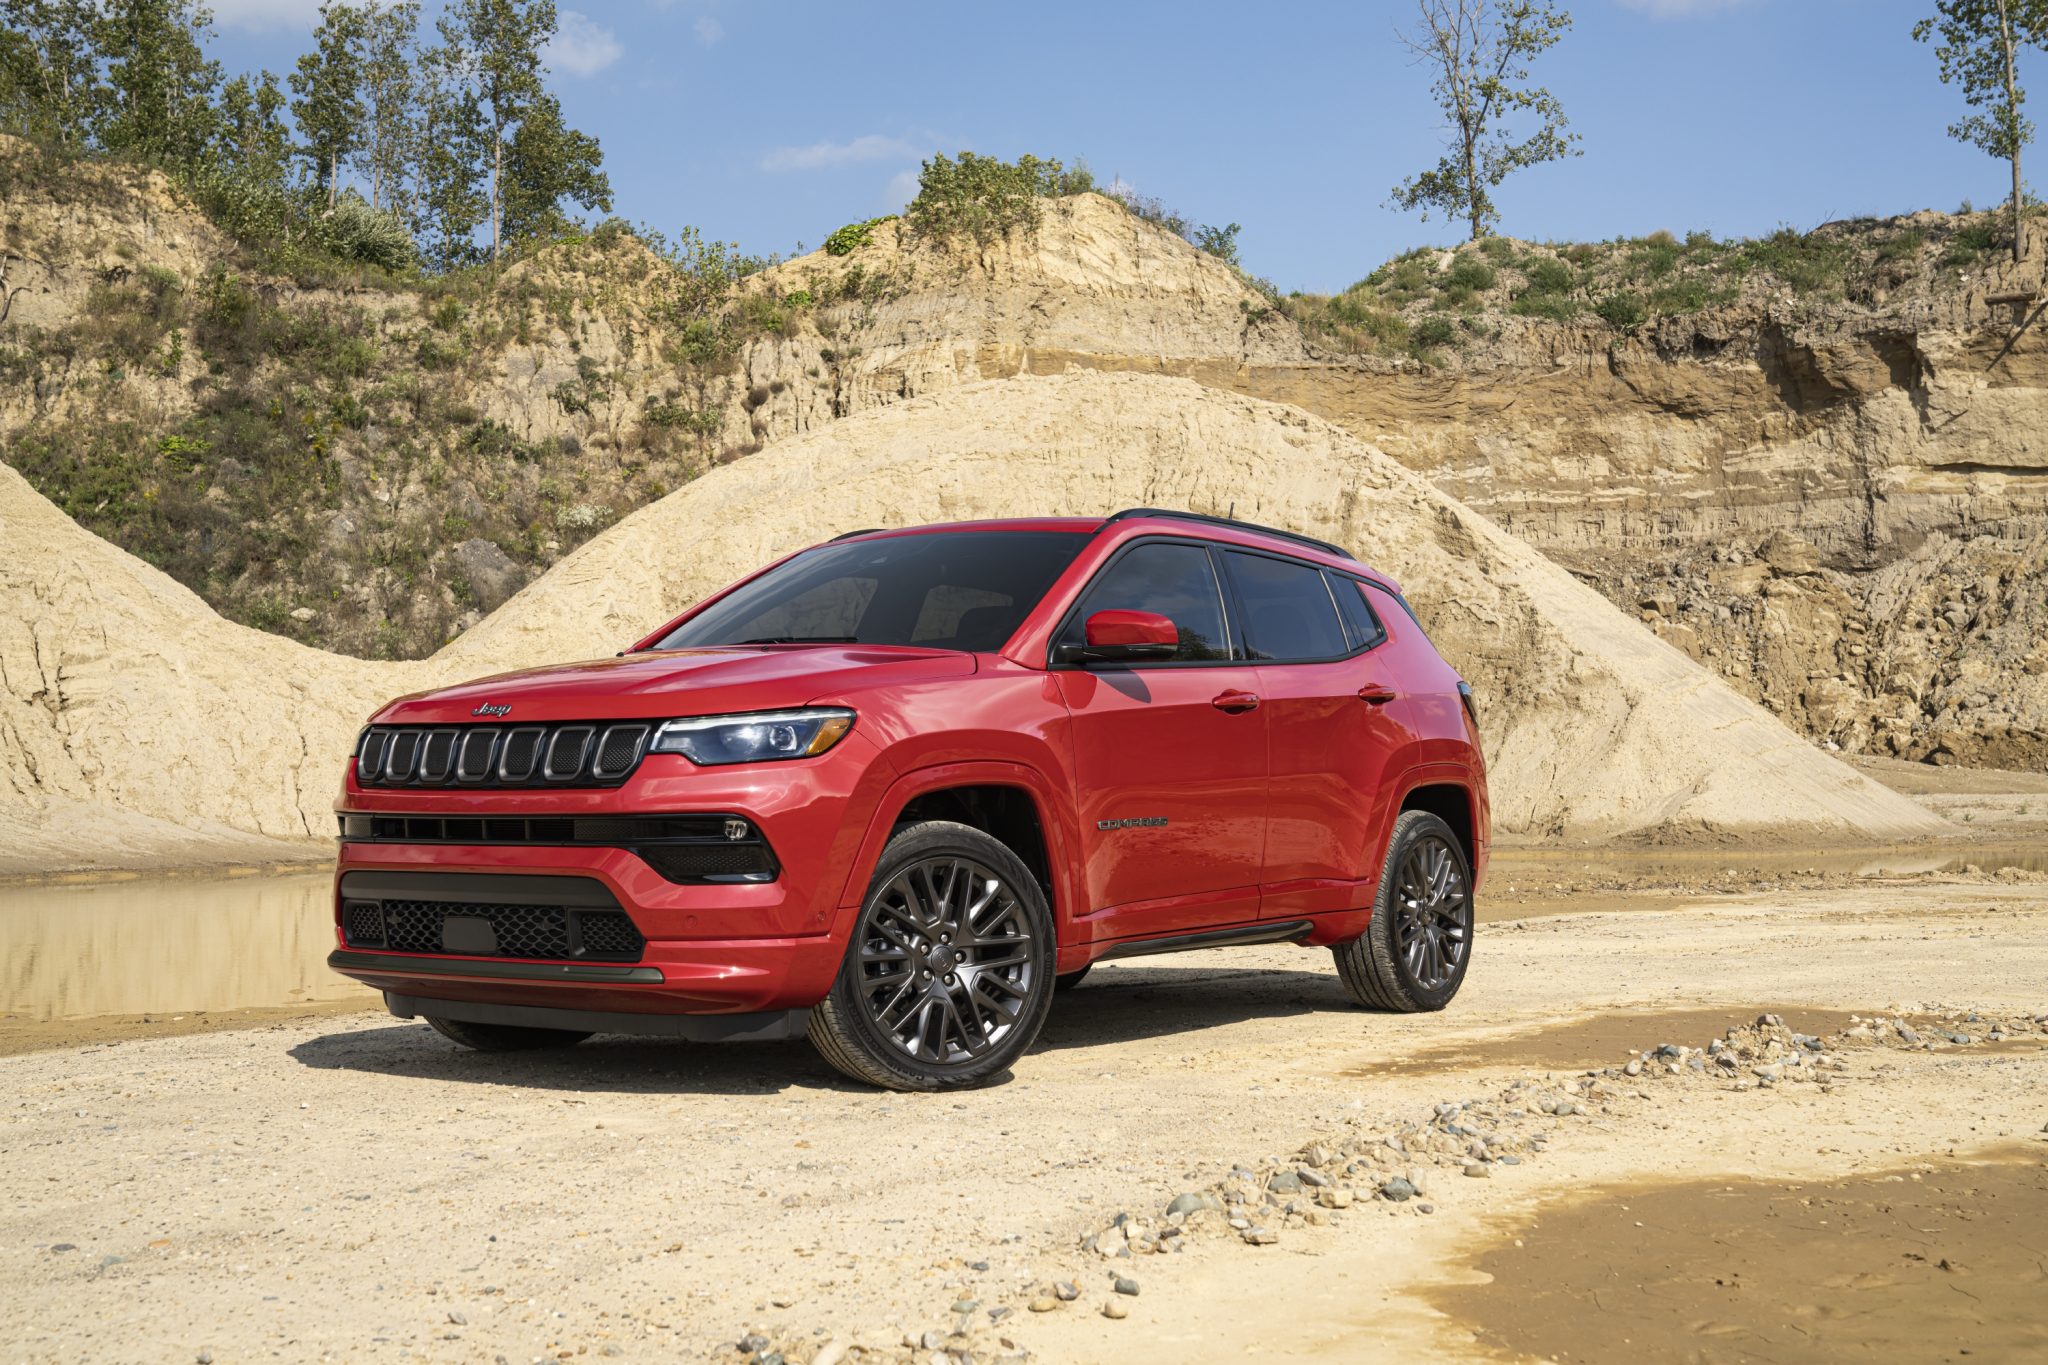 New 2022 Jeep® Compass Earns TOP SAFETY PICK Rating from IIHS